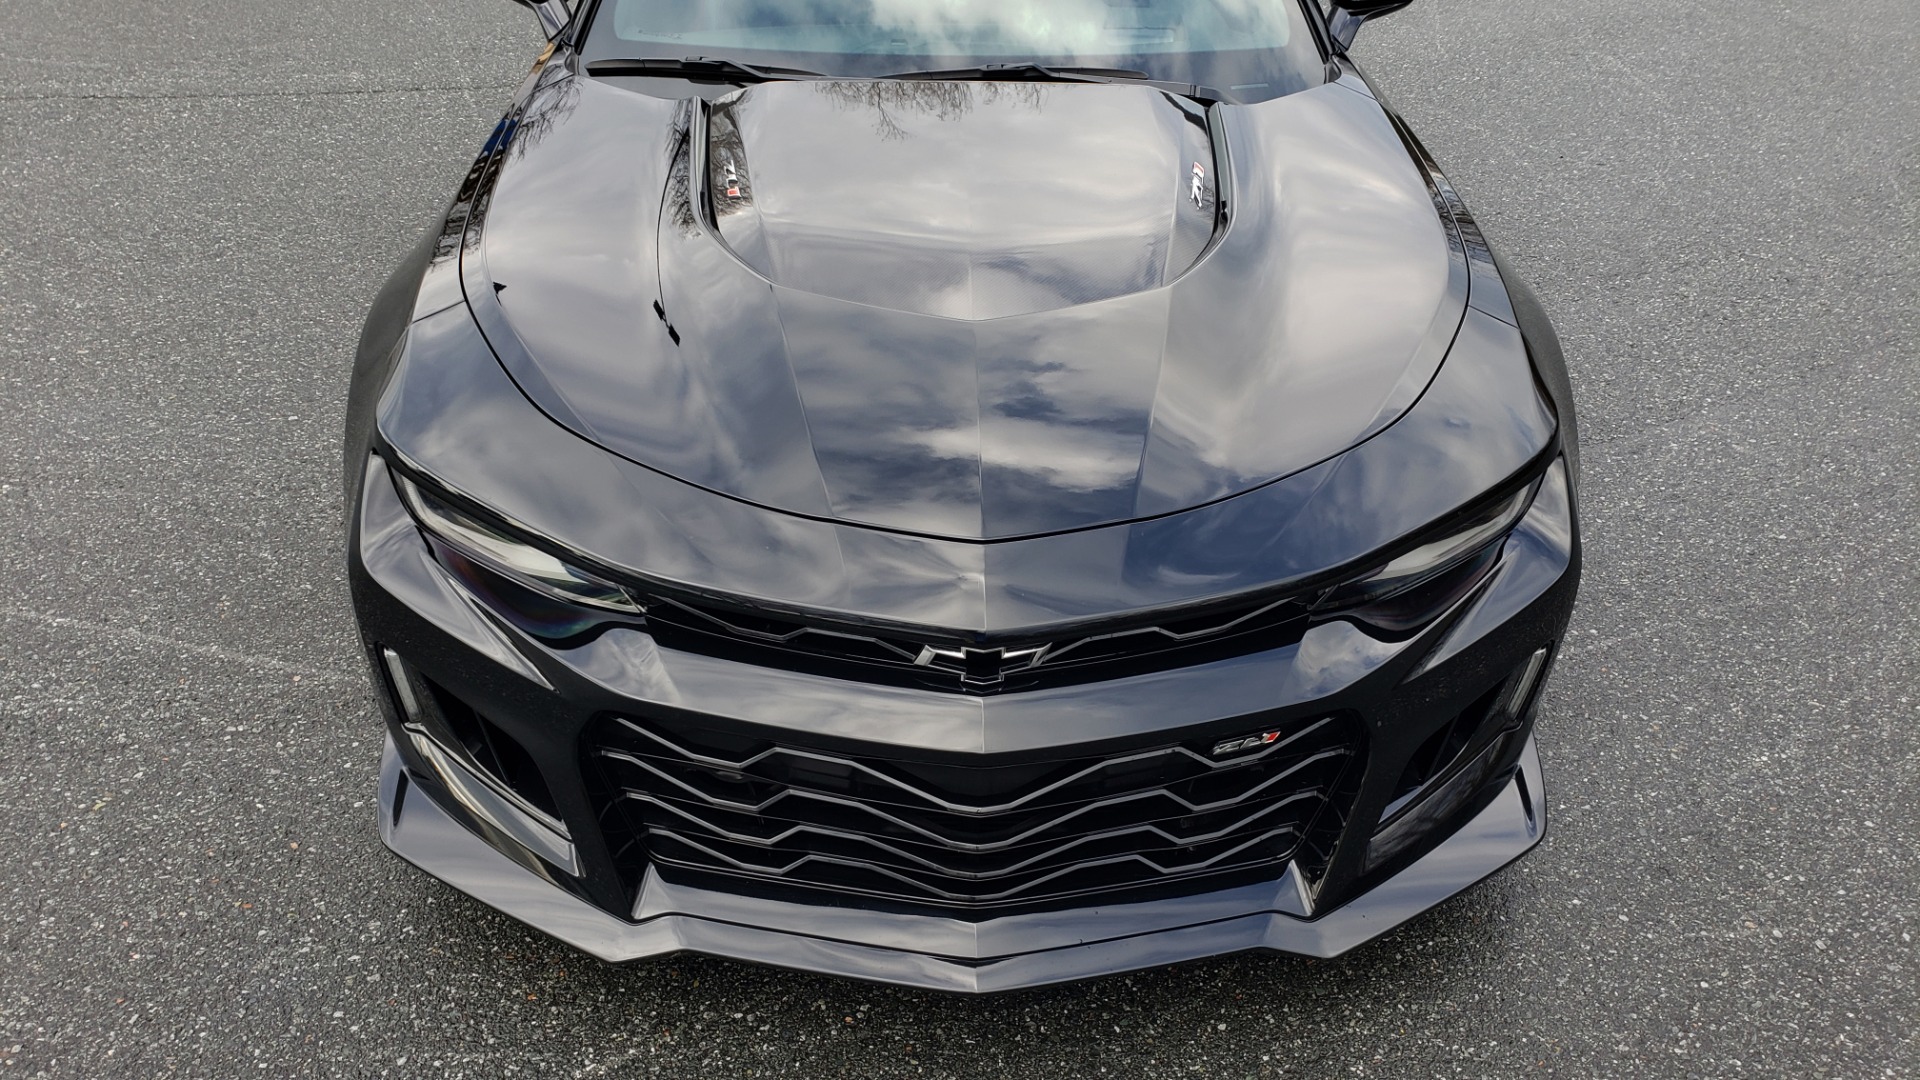 Used 2018 Chevrolet CAMARO ZL1 6.2L SUPERCHARGED V8 650 / NAV / SUNROOF / REARVIEW for sale Sold at Formula Imports in Charlotte NC 28227 21